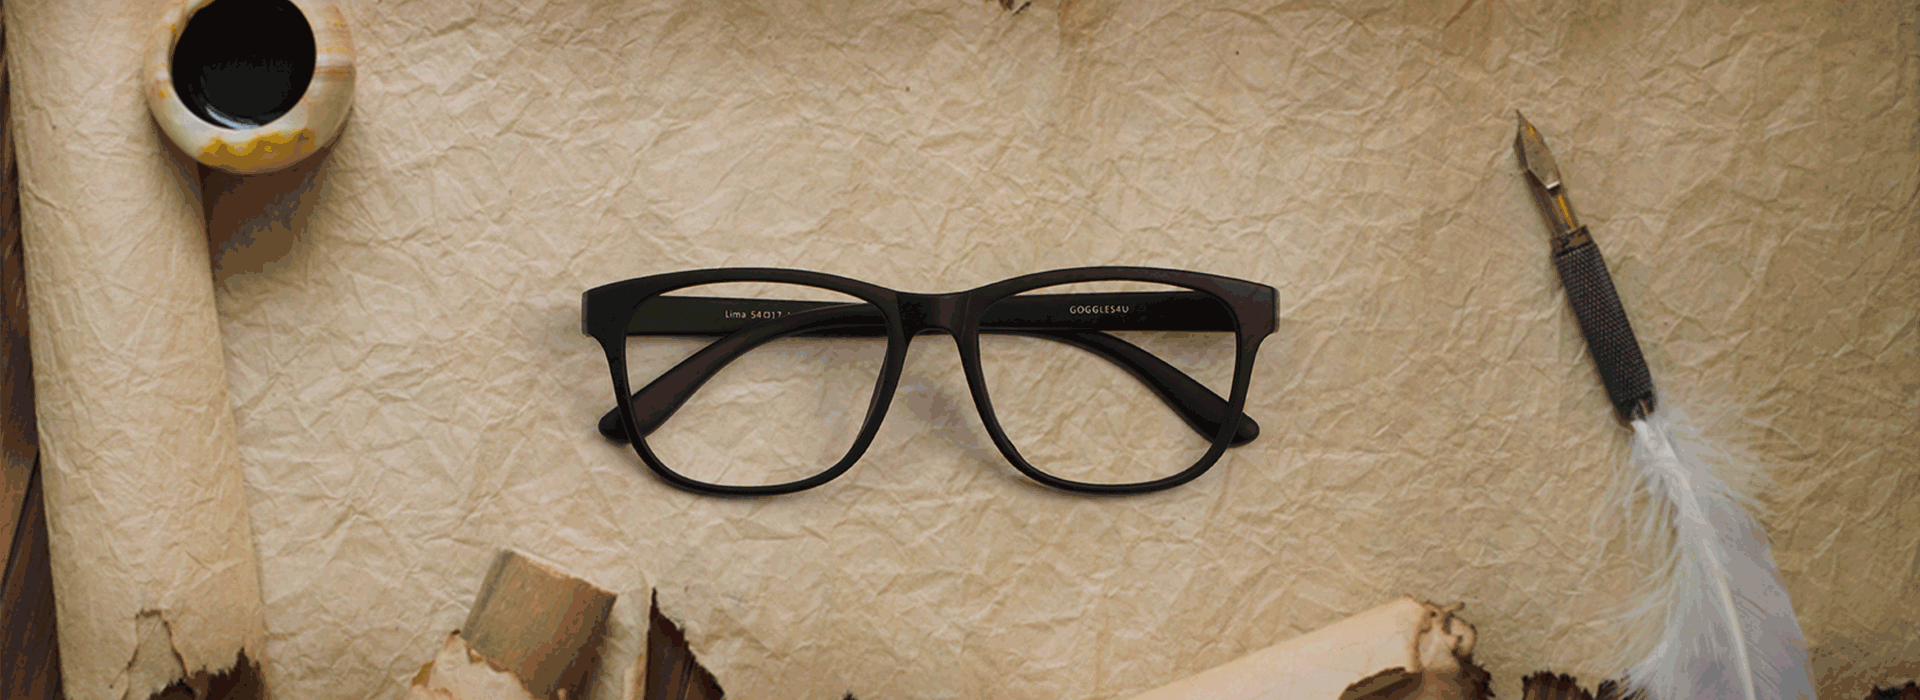 World Poetry Day – Get New Reading Glasses For The Riveting Poetic Reads: